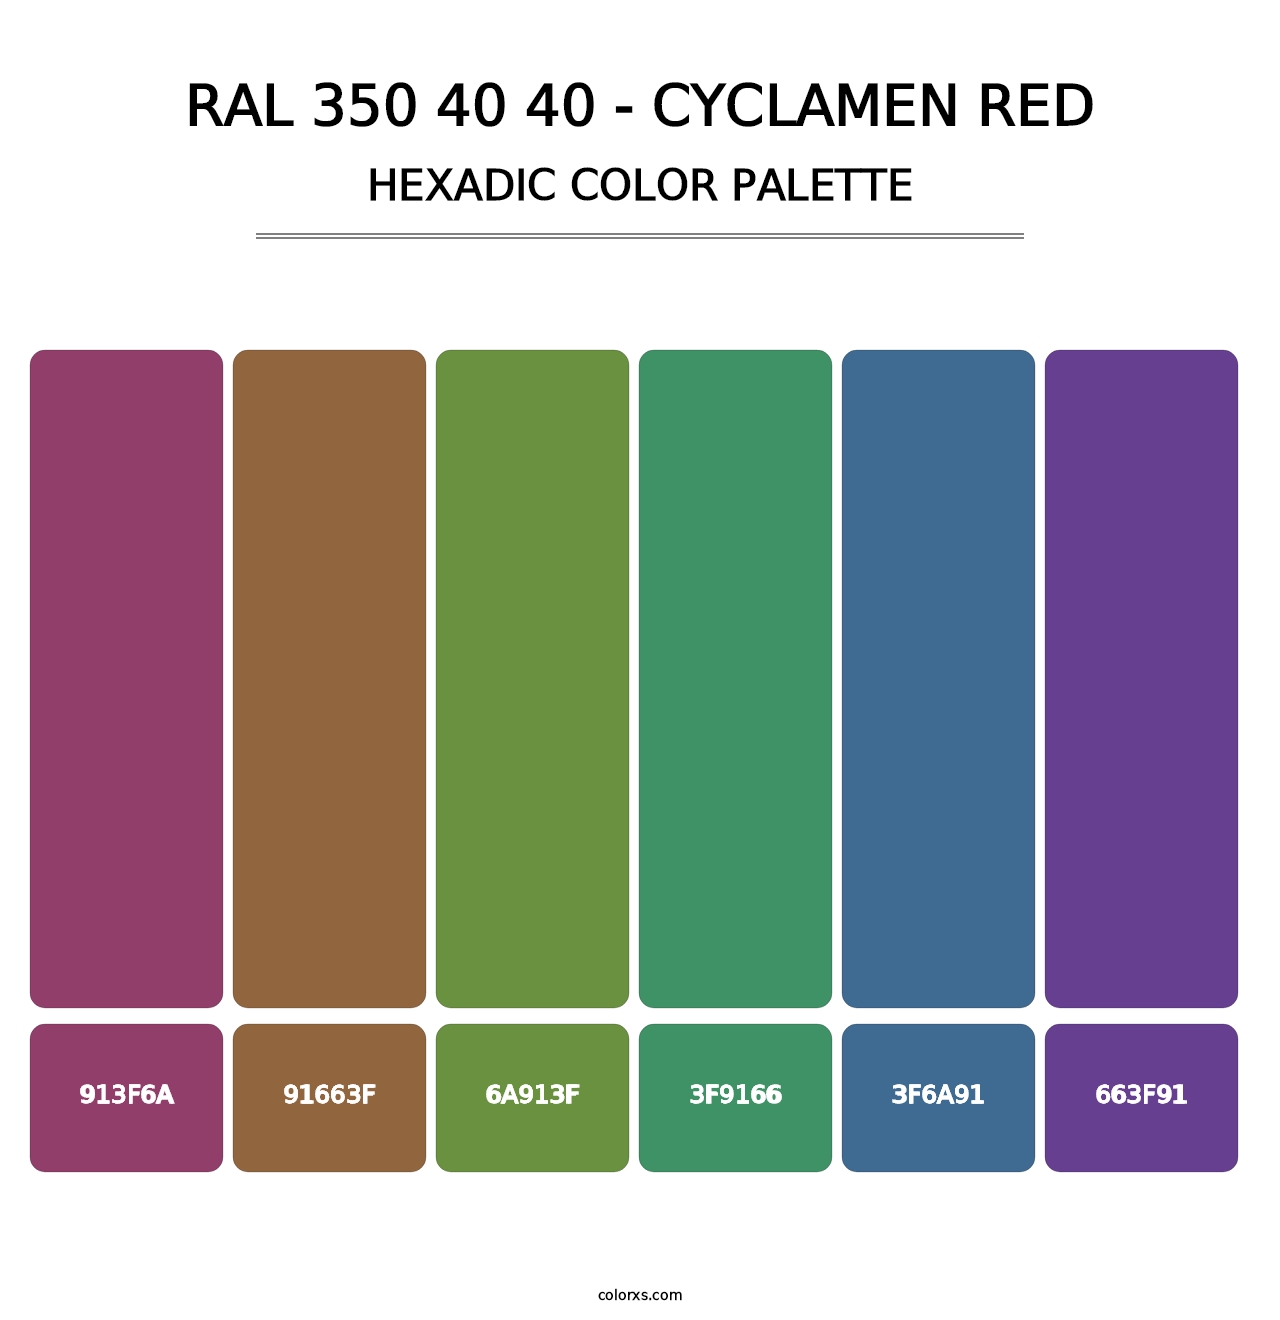 RAL 350 40 40 - Cyclamen Red - Hexadic Color Palette